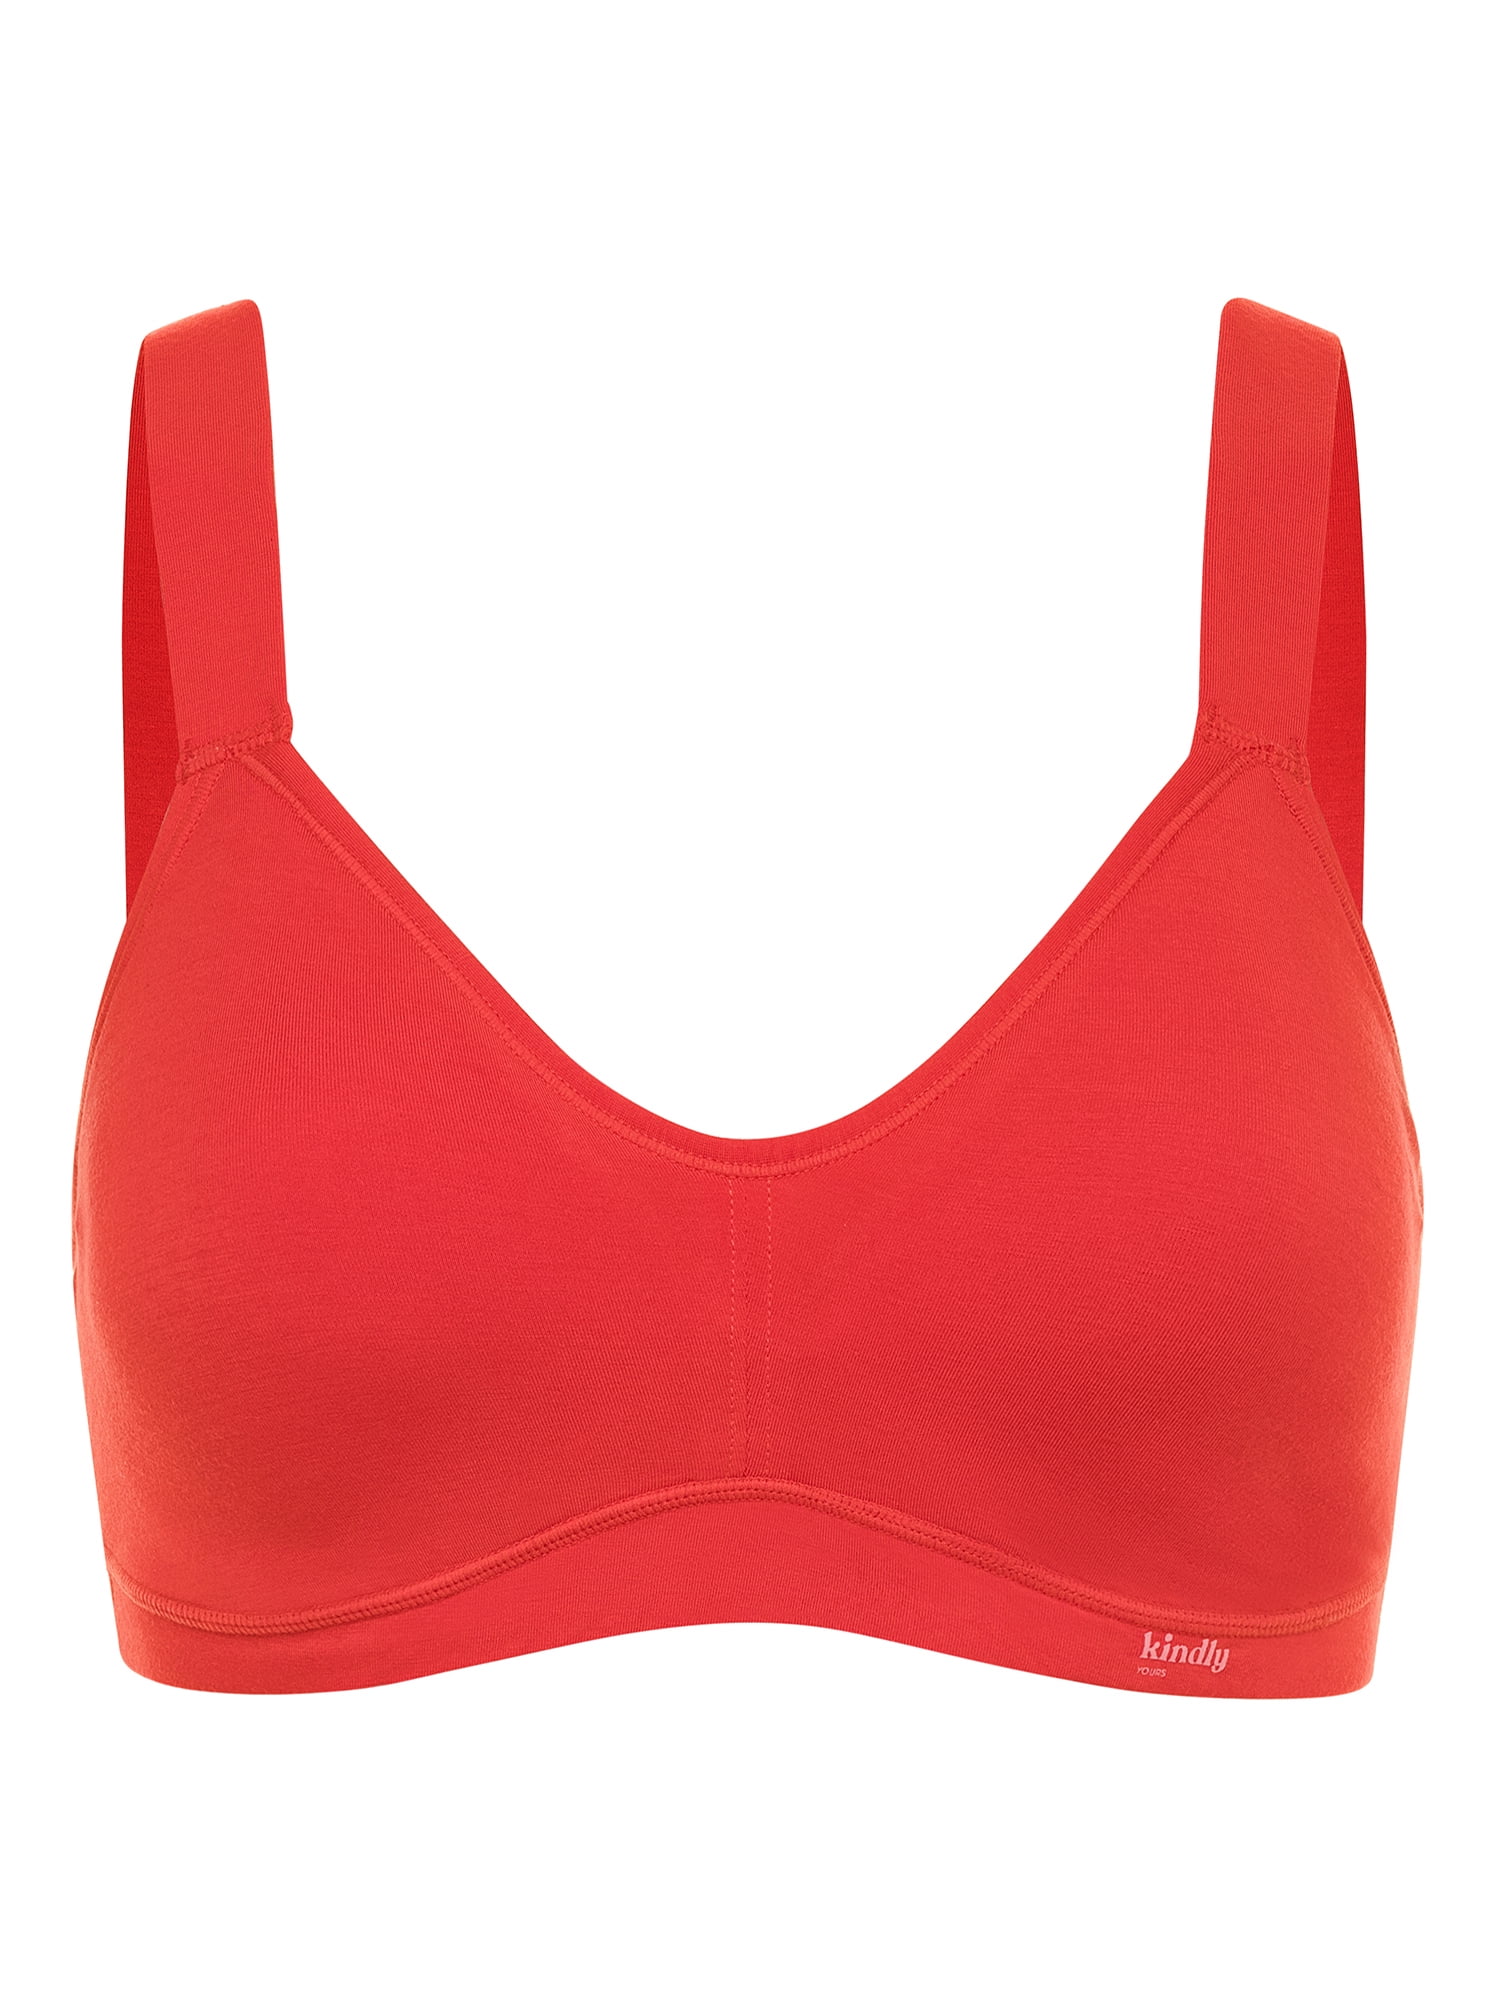 Kindly Yours Women's Comfort Modal Lounge Pullover Bra, Sizes S